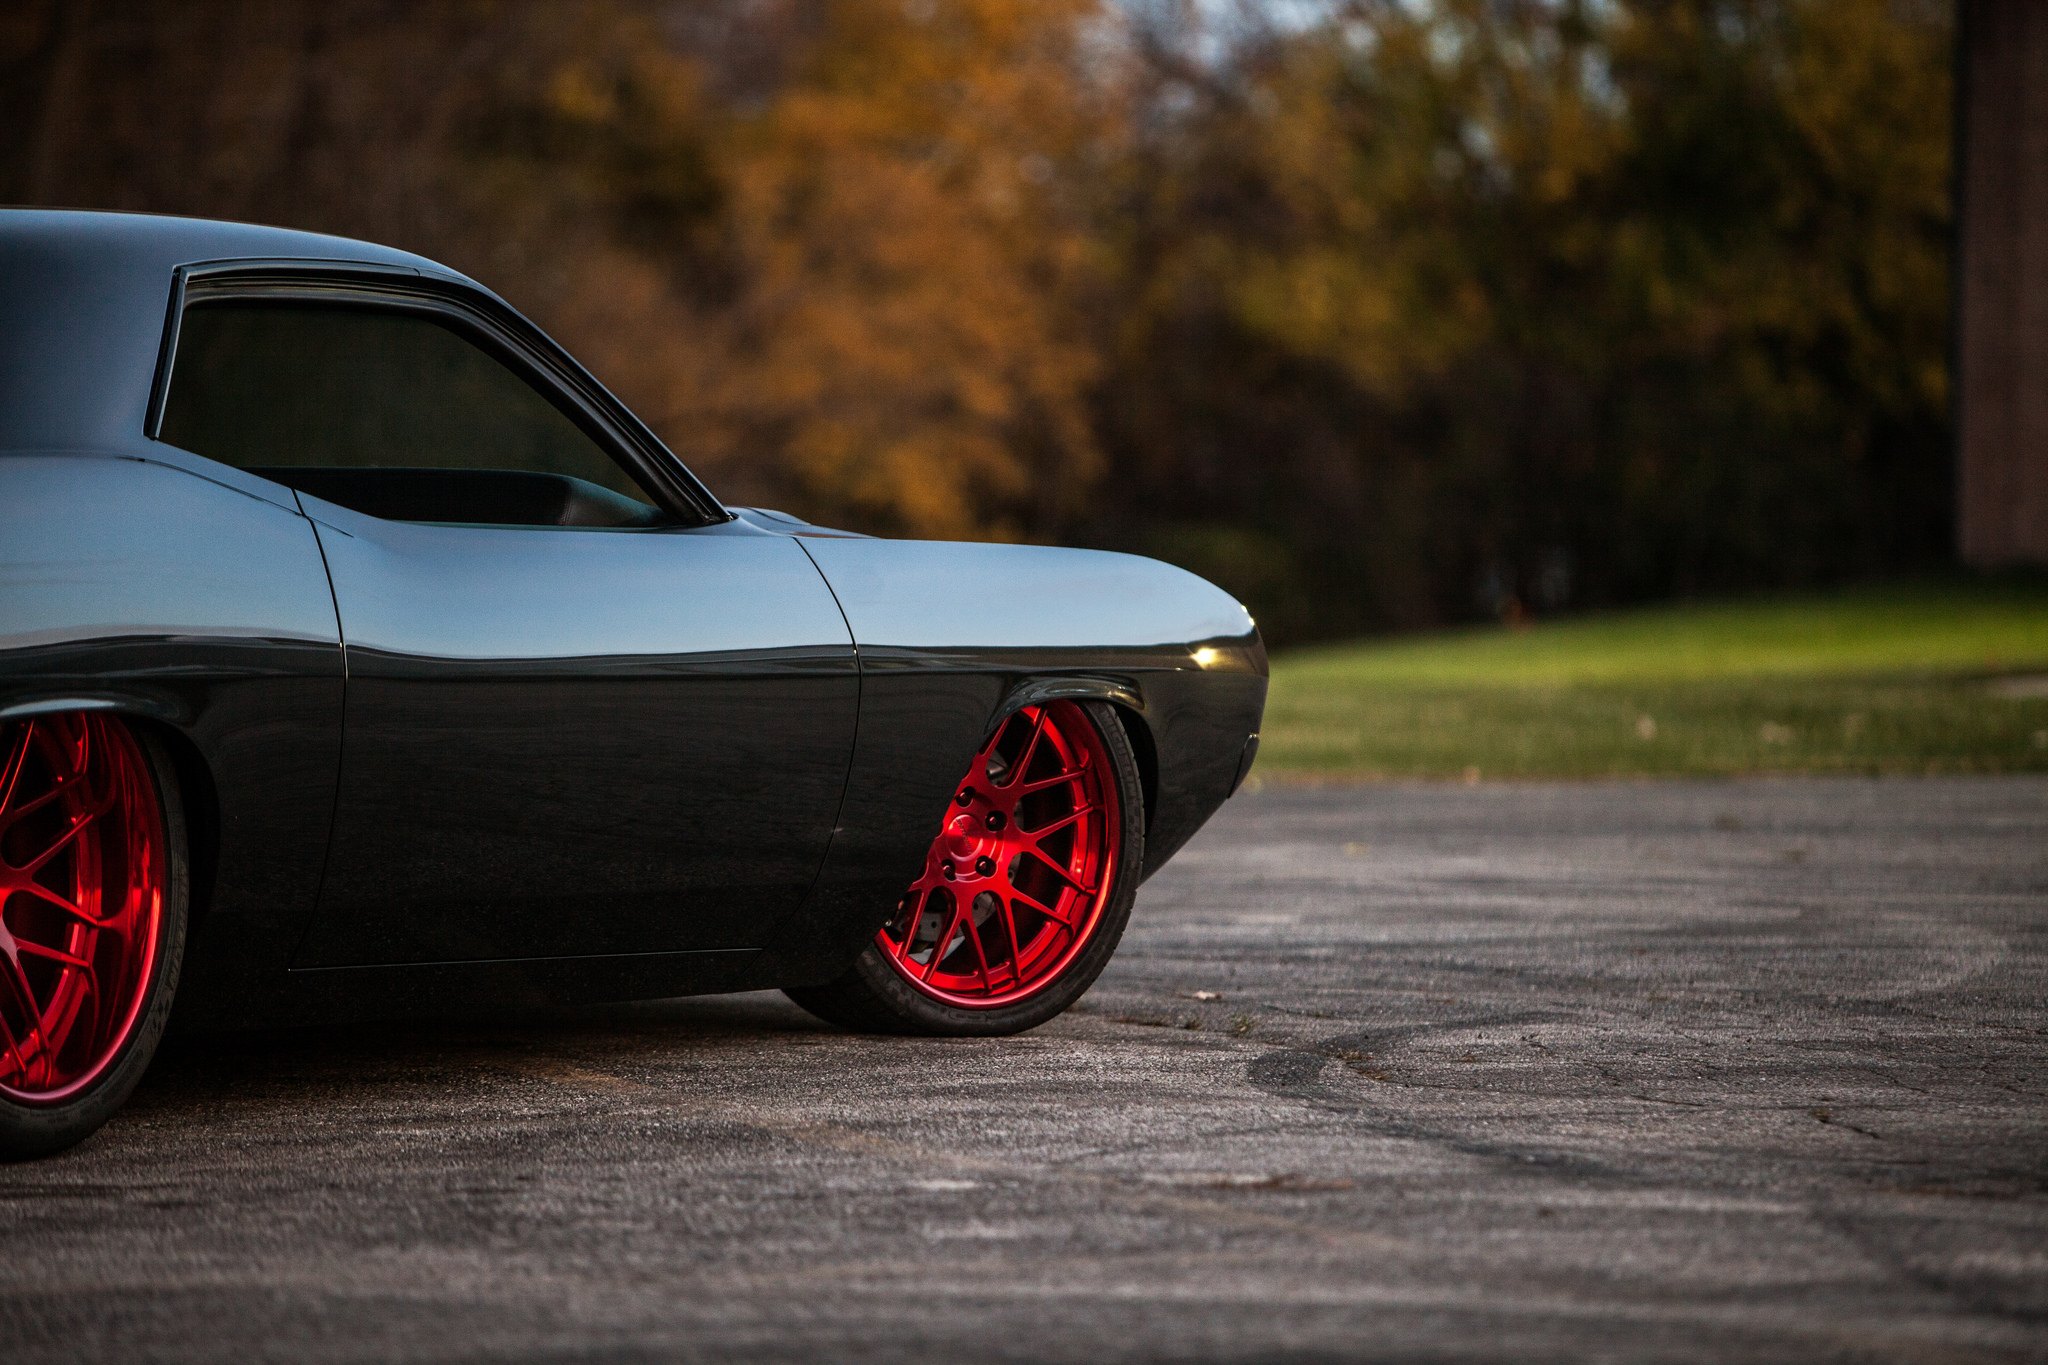 Gloss Red Forgeline Wheels on Black Plymouth Barracuda - Photo by Forgeline Motorsports